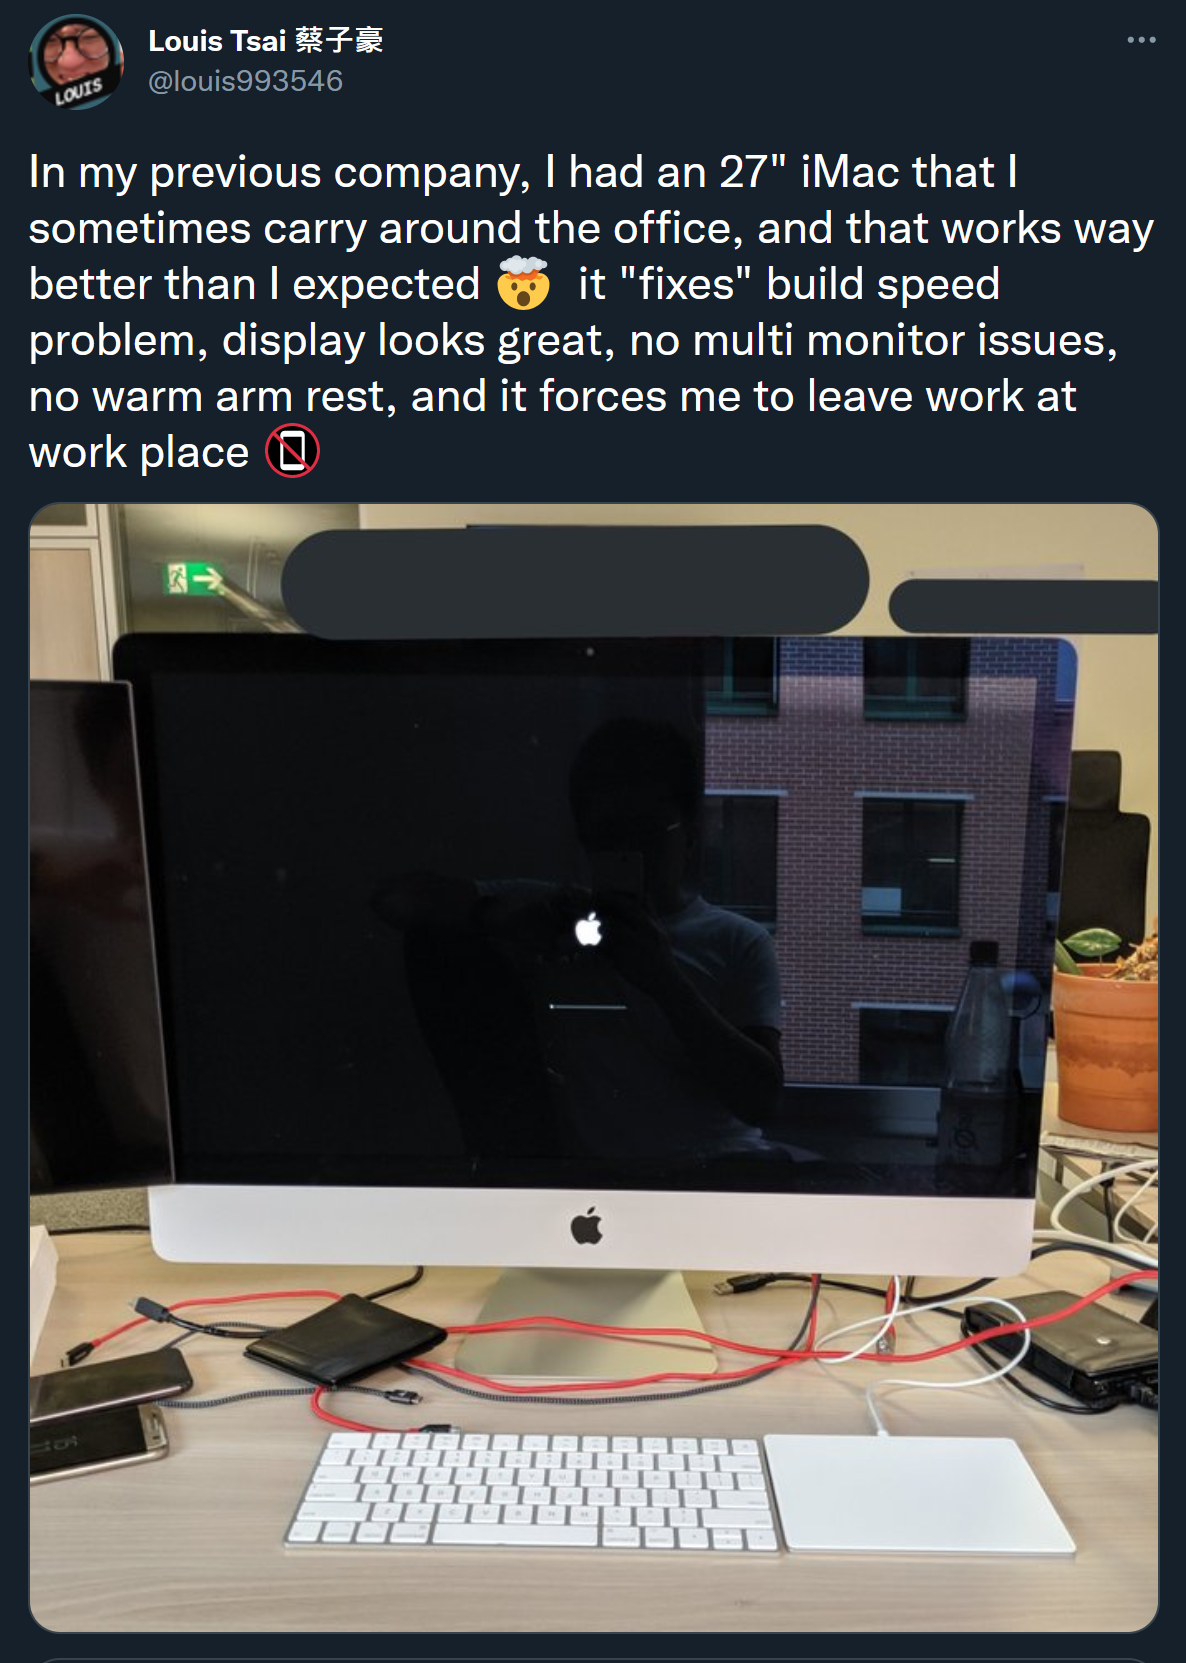 A screenshot of a Tweet from Louis (@louis993546), which has a picture of an iMac in the boot screen, on an office desk. The tweet writes "In my previous company, I had an 27" iMac that I sometimes carry around the office, and that works way better than I expected 🤯 it "fixes" build speed problem, display looks great, no multi monitor issues, no warm arm rest, and it forces me to leave work at work place 📵"